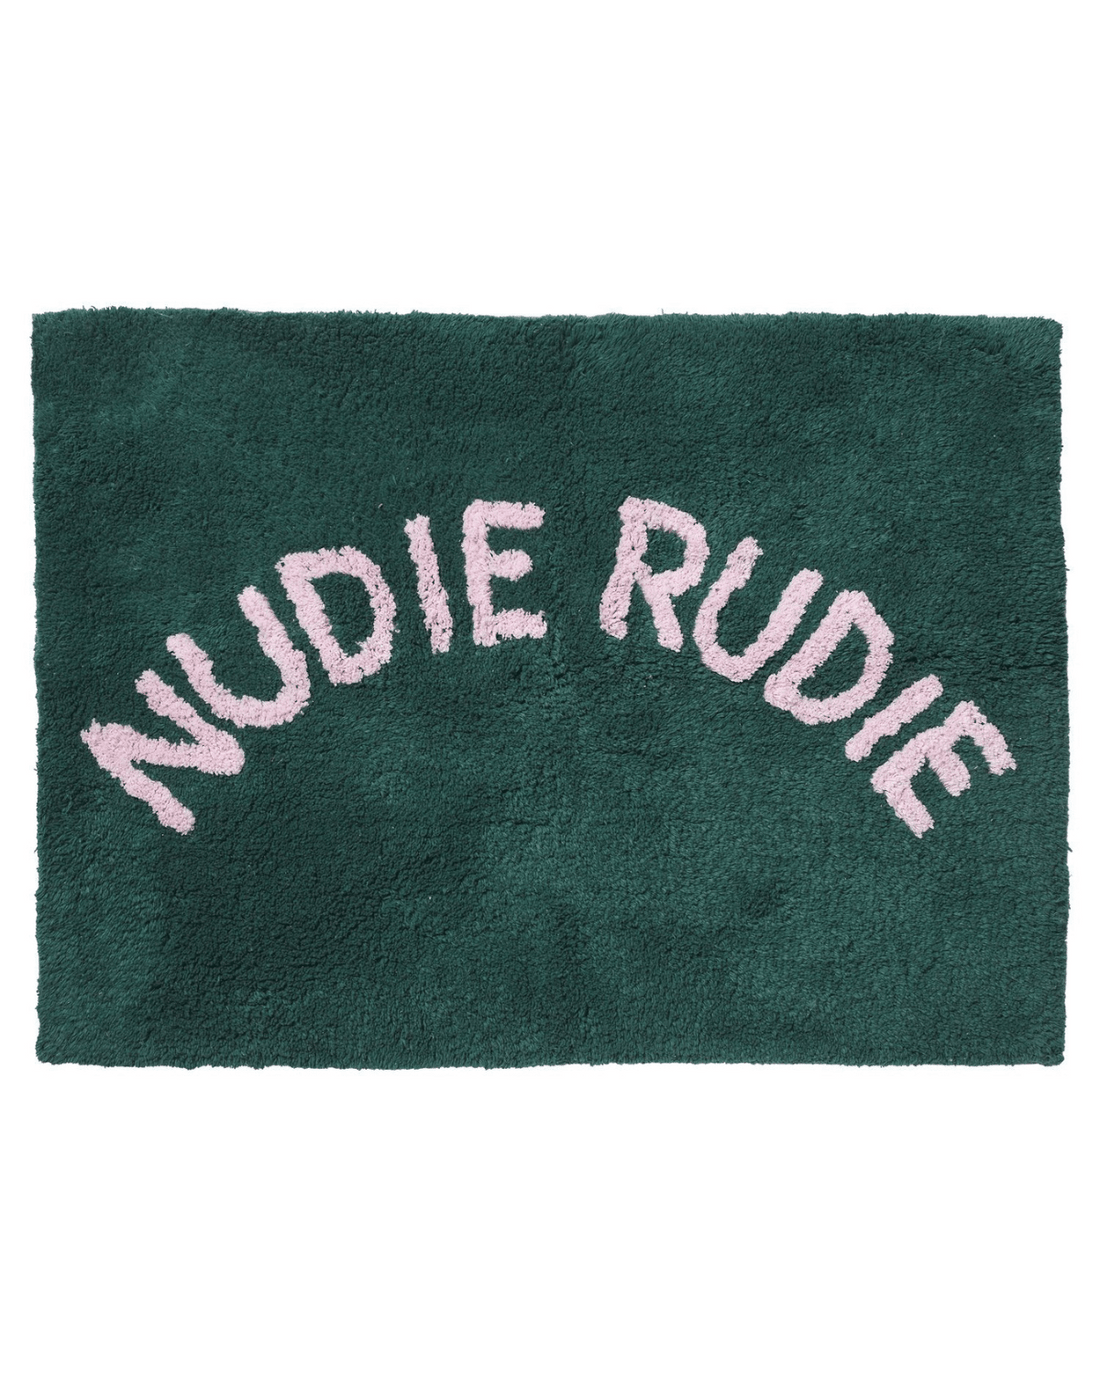 tula tufted bath mat with nudie rudie writing in peacock colour